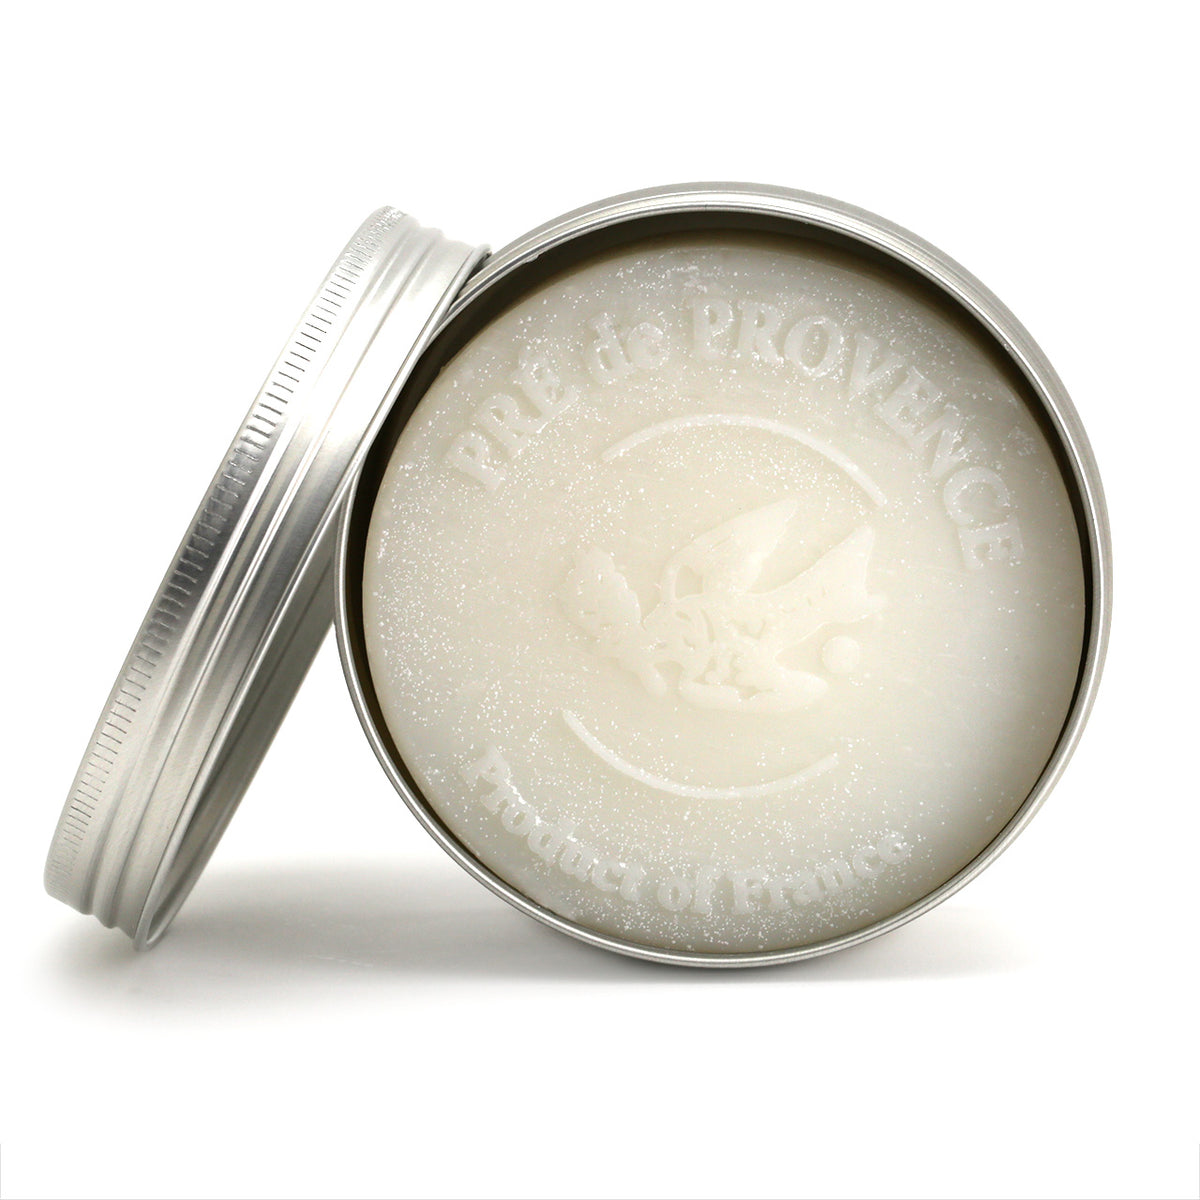 view of the top of the white shaving soap puck, inside the tin